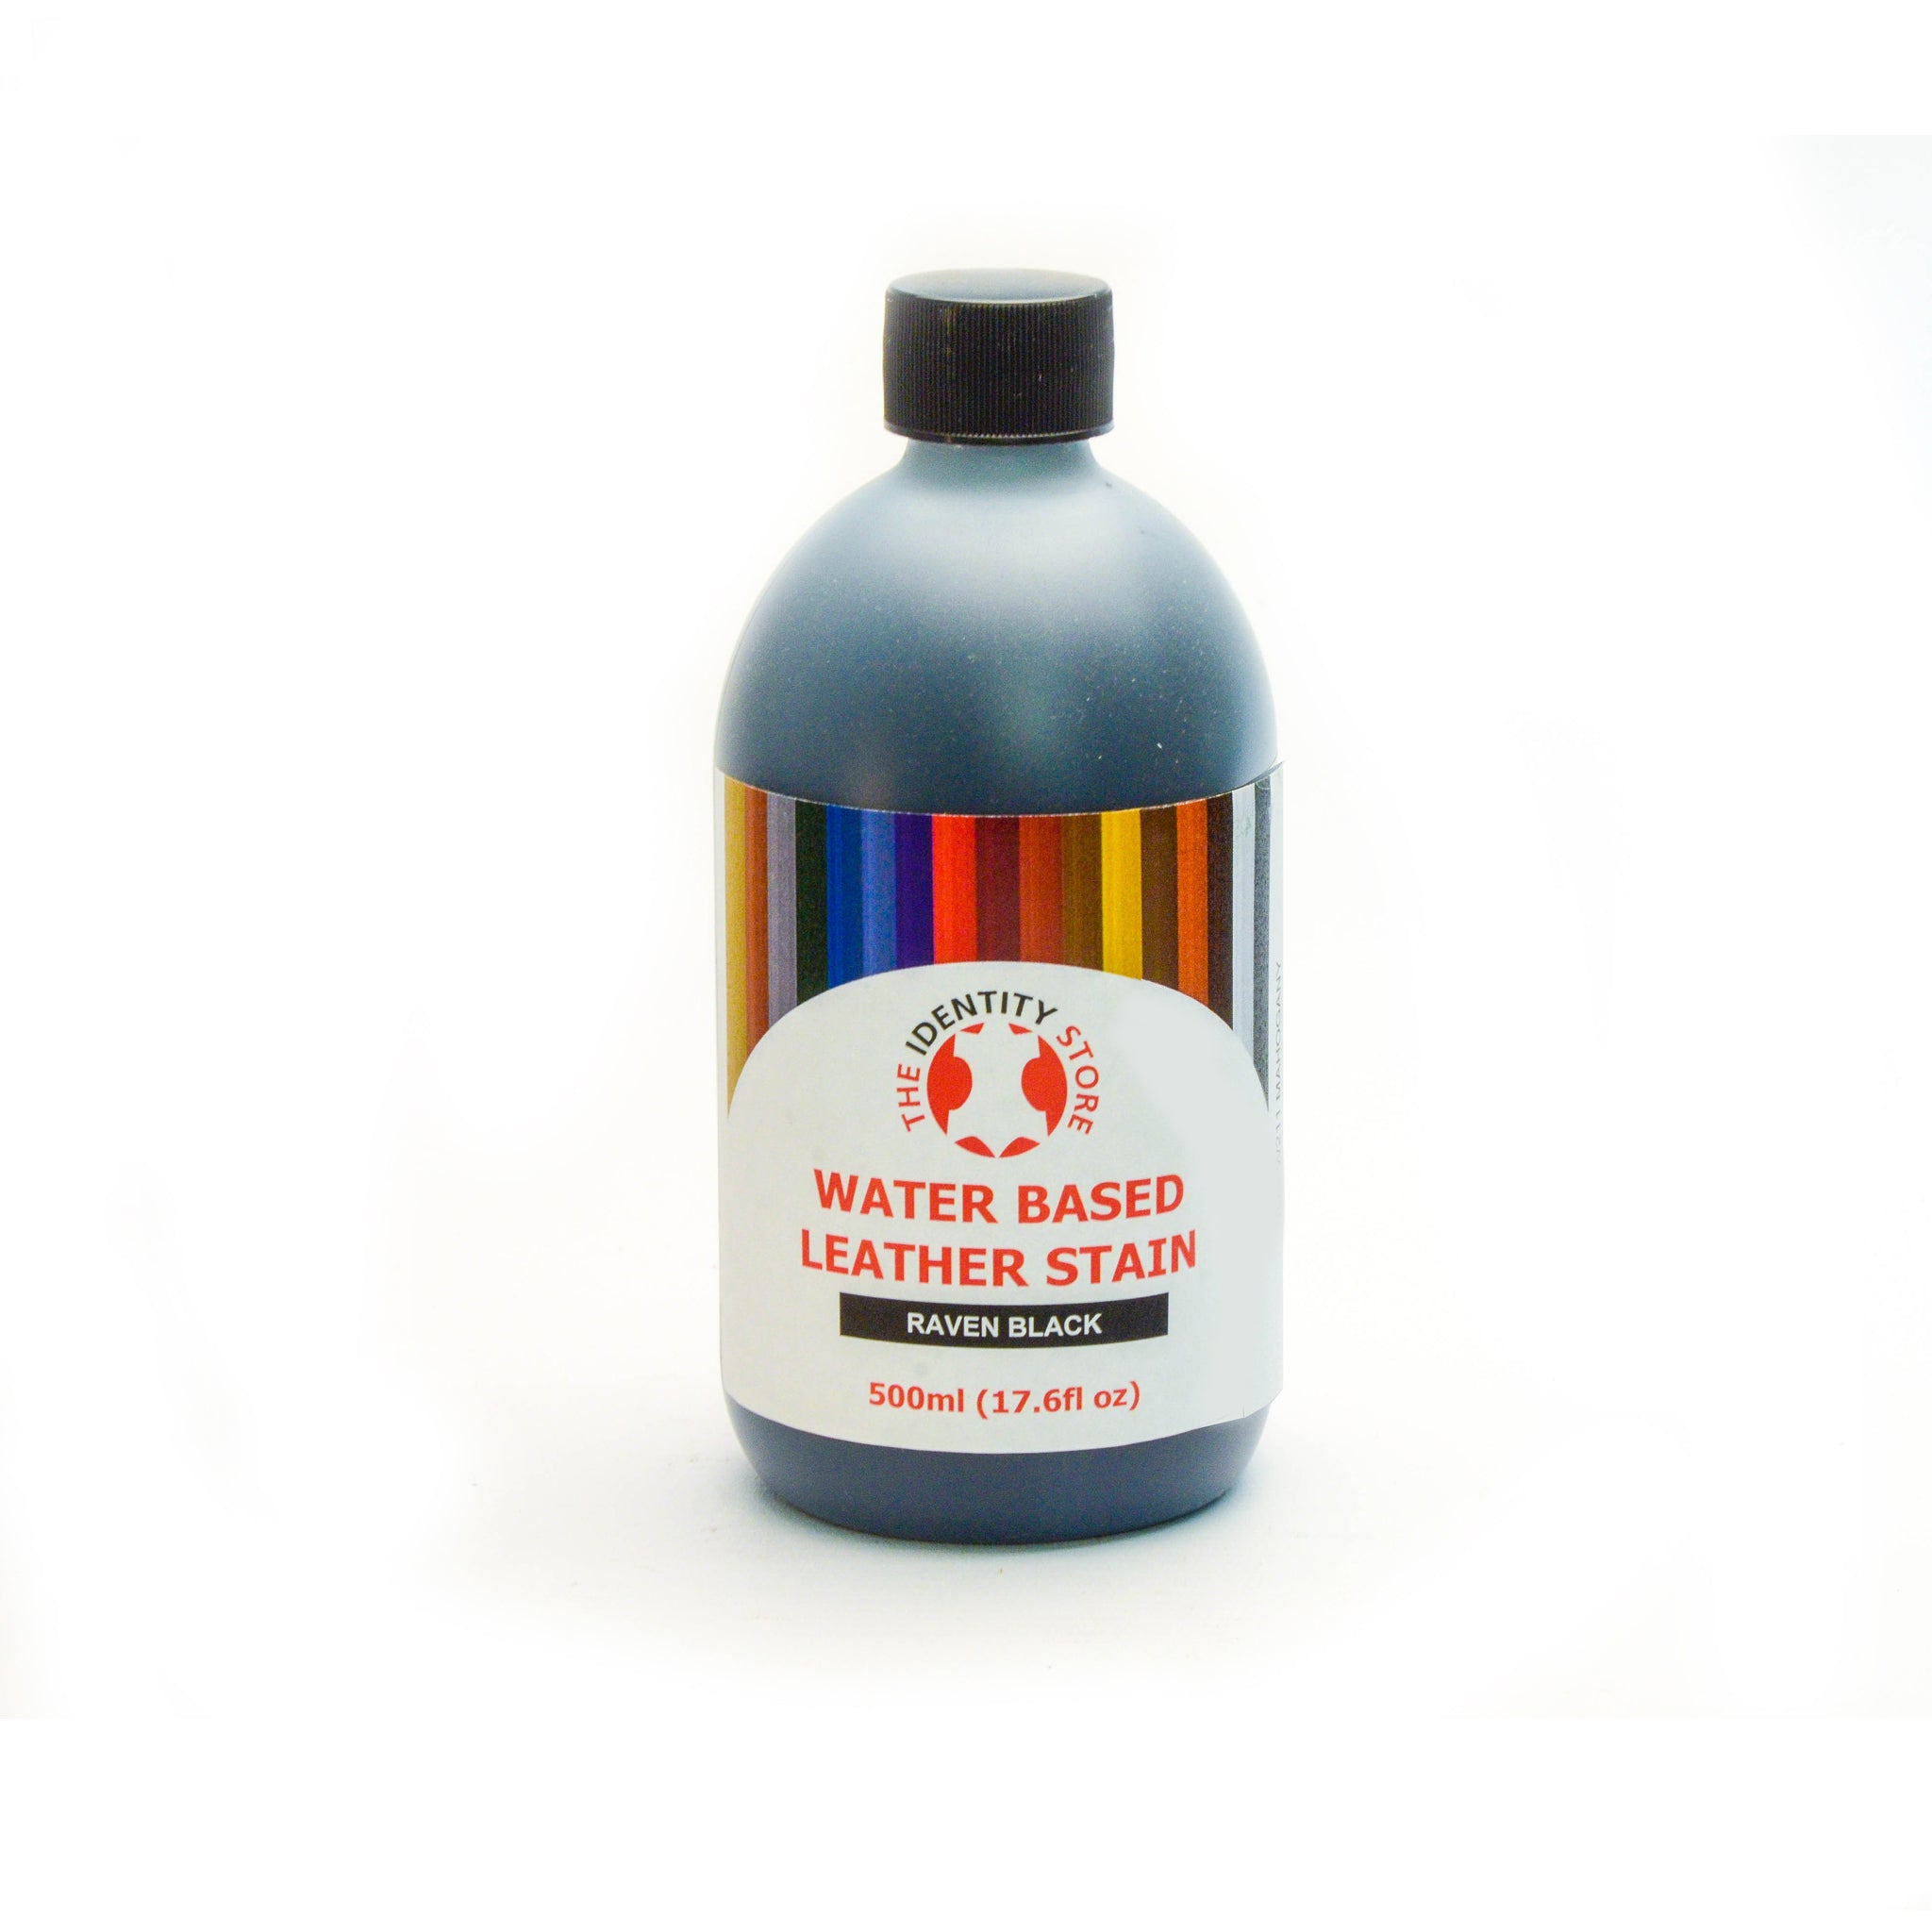 Raven Black 500ml - The Identity Store Water Based Leather Stain